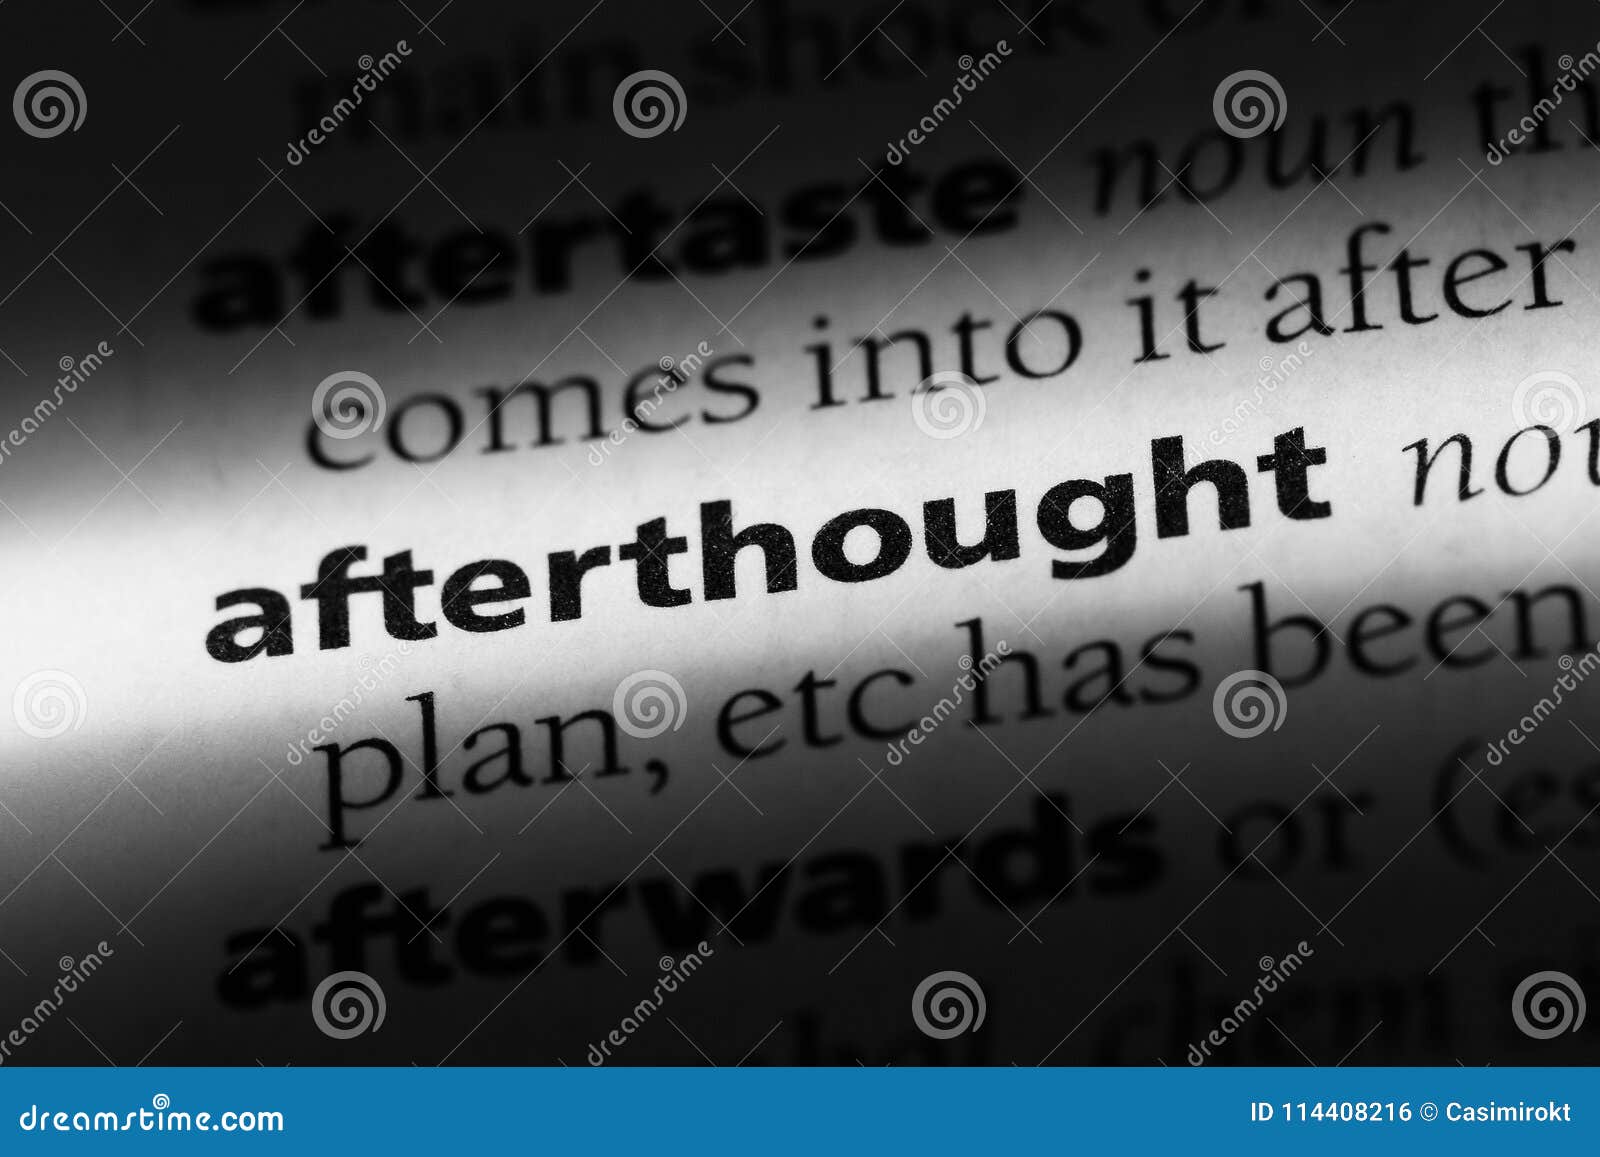 afterthought